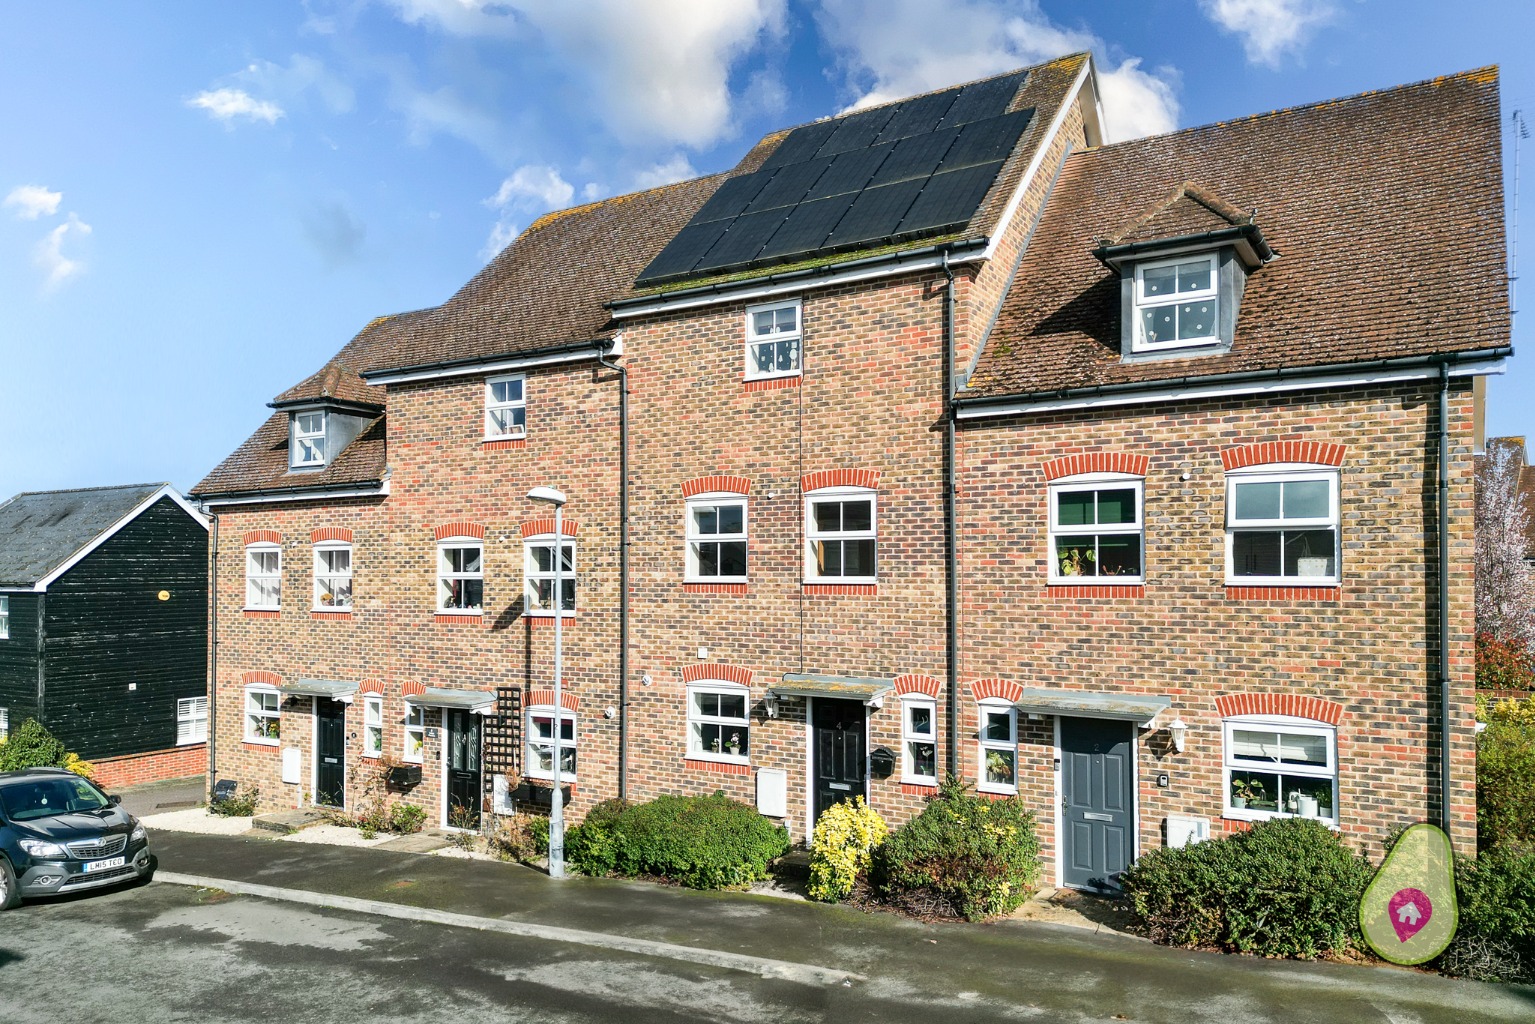 4 bed terraced house for sale in Grouse Meadows, Bracknell - Property Image 1